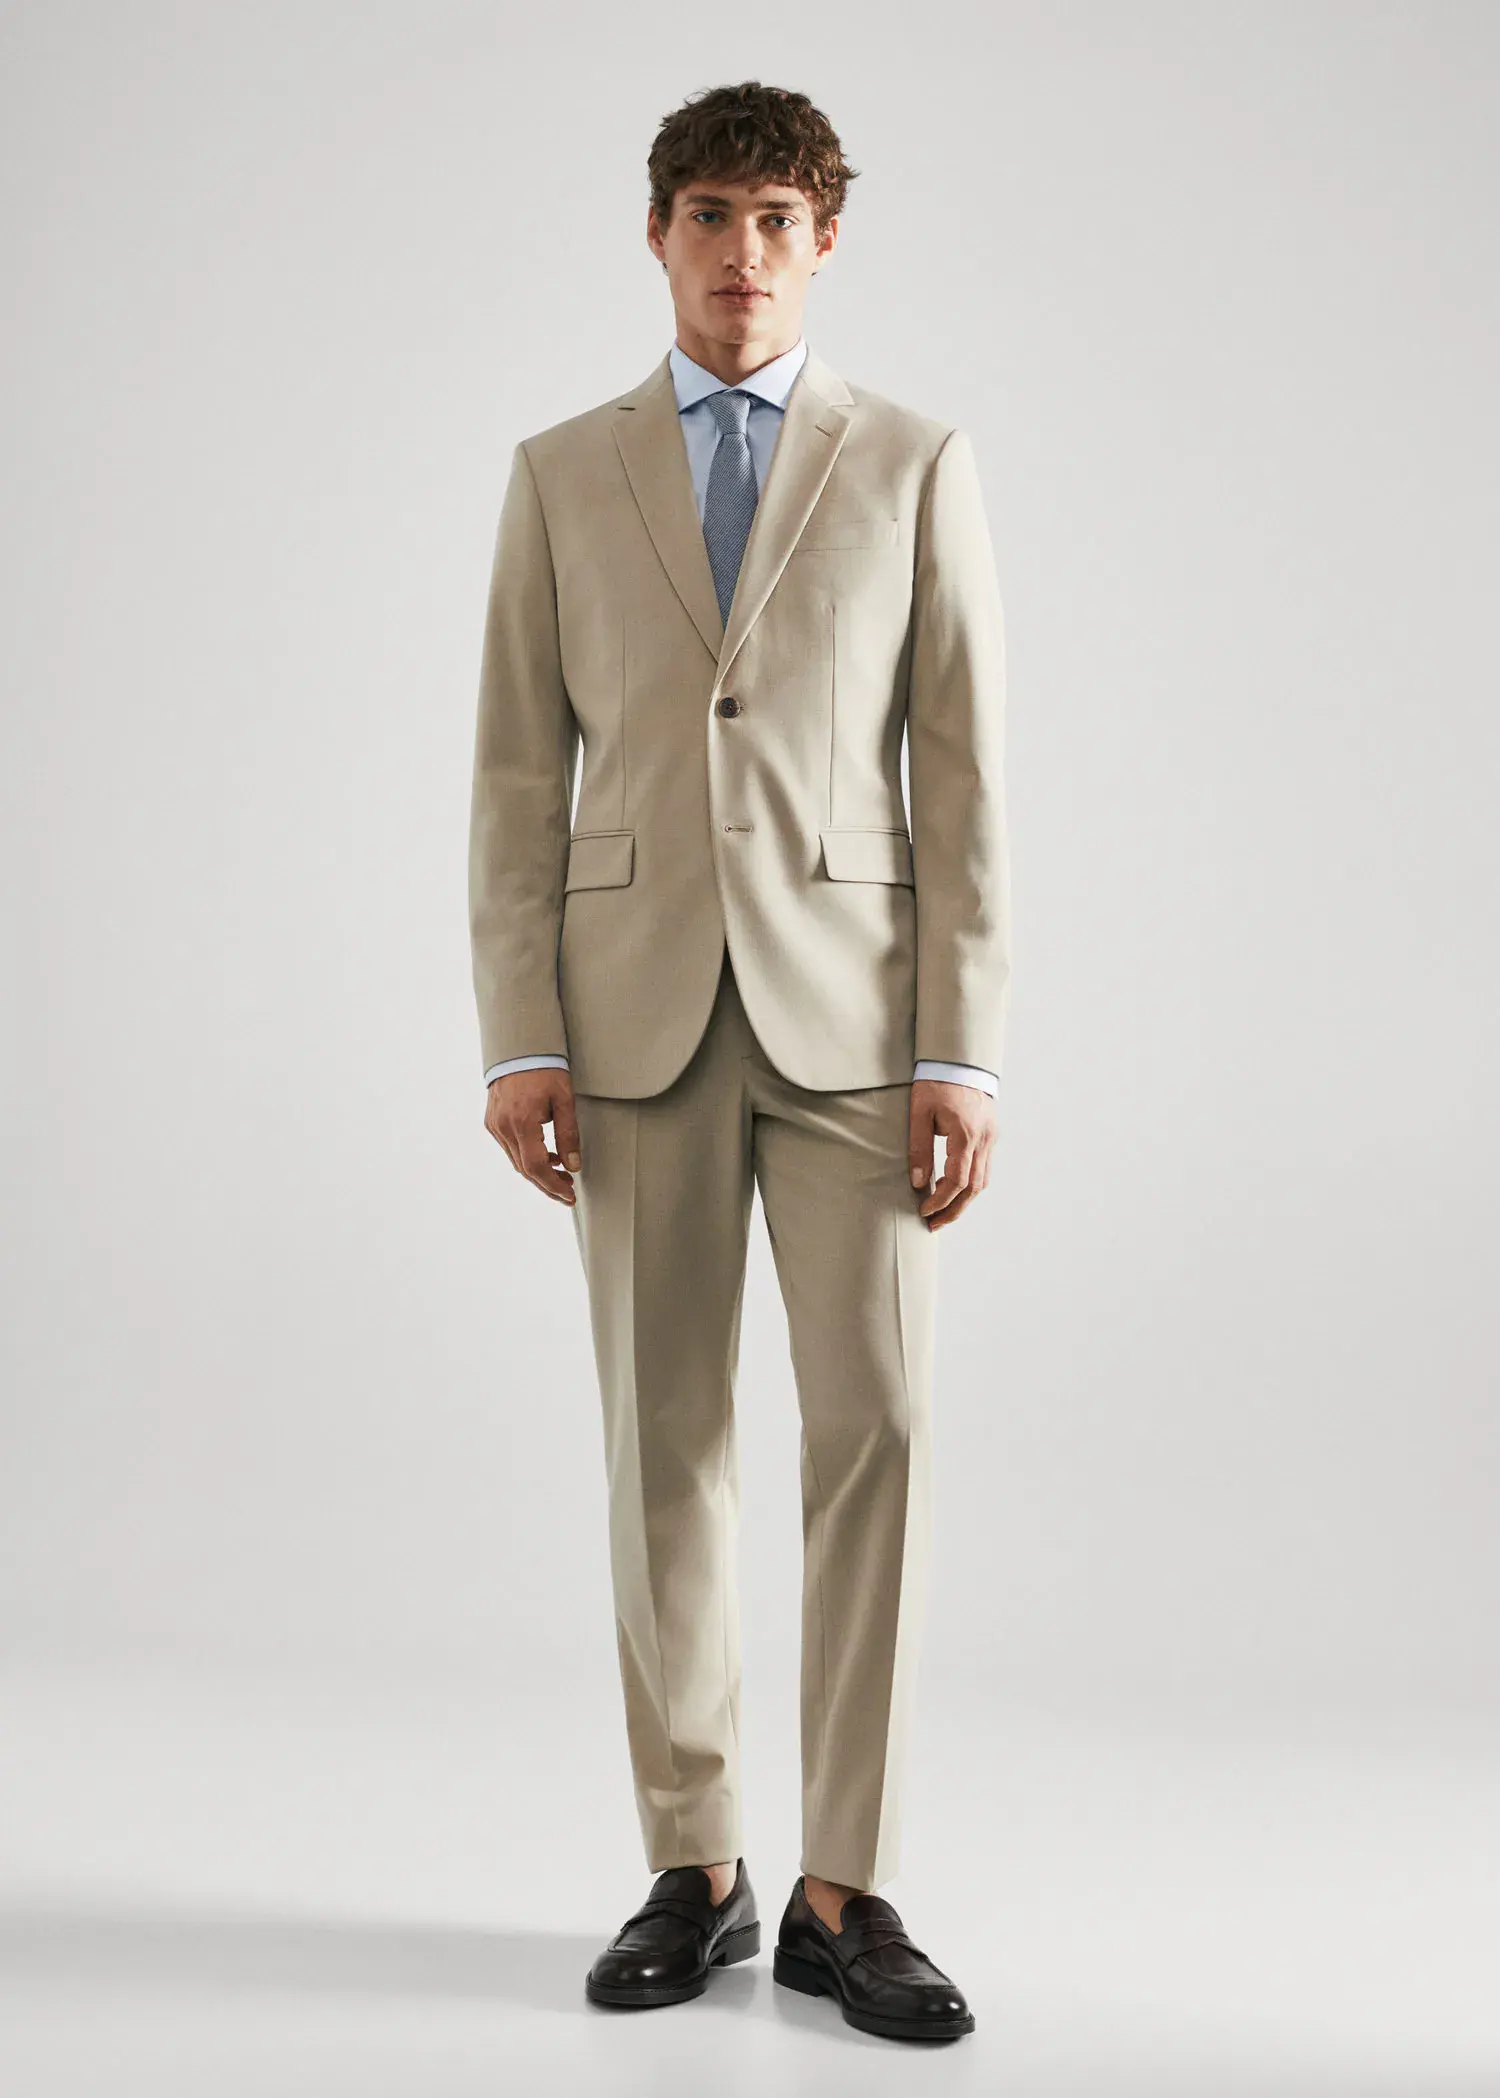 Mango Slim fit structured suit shirt. a man in a suit and tie standing in front of a white wall. 